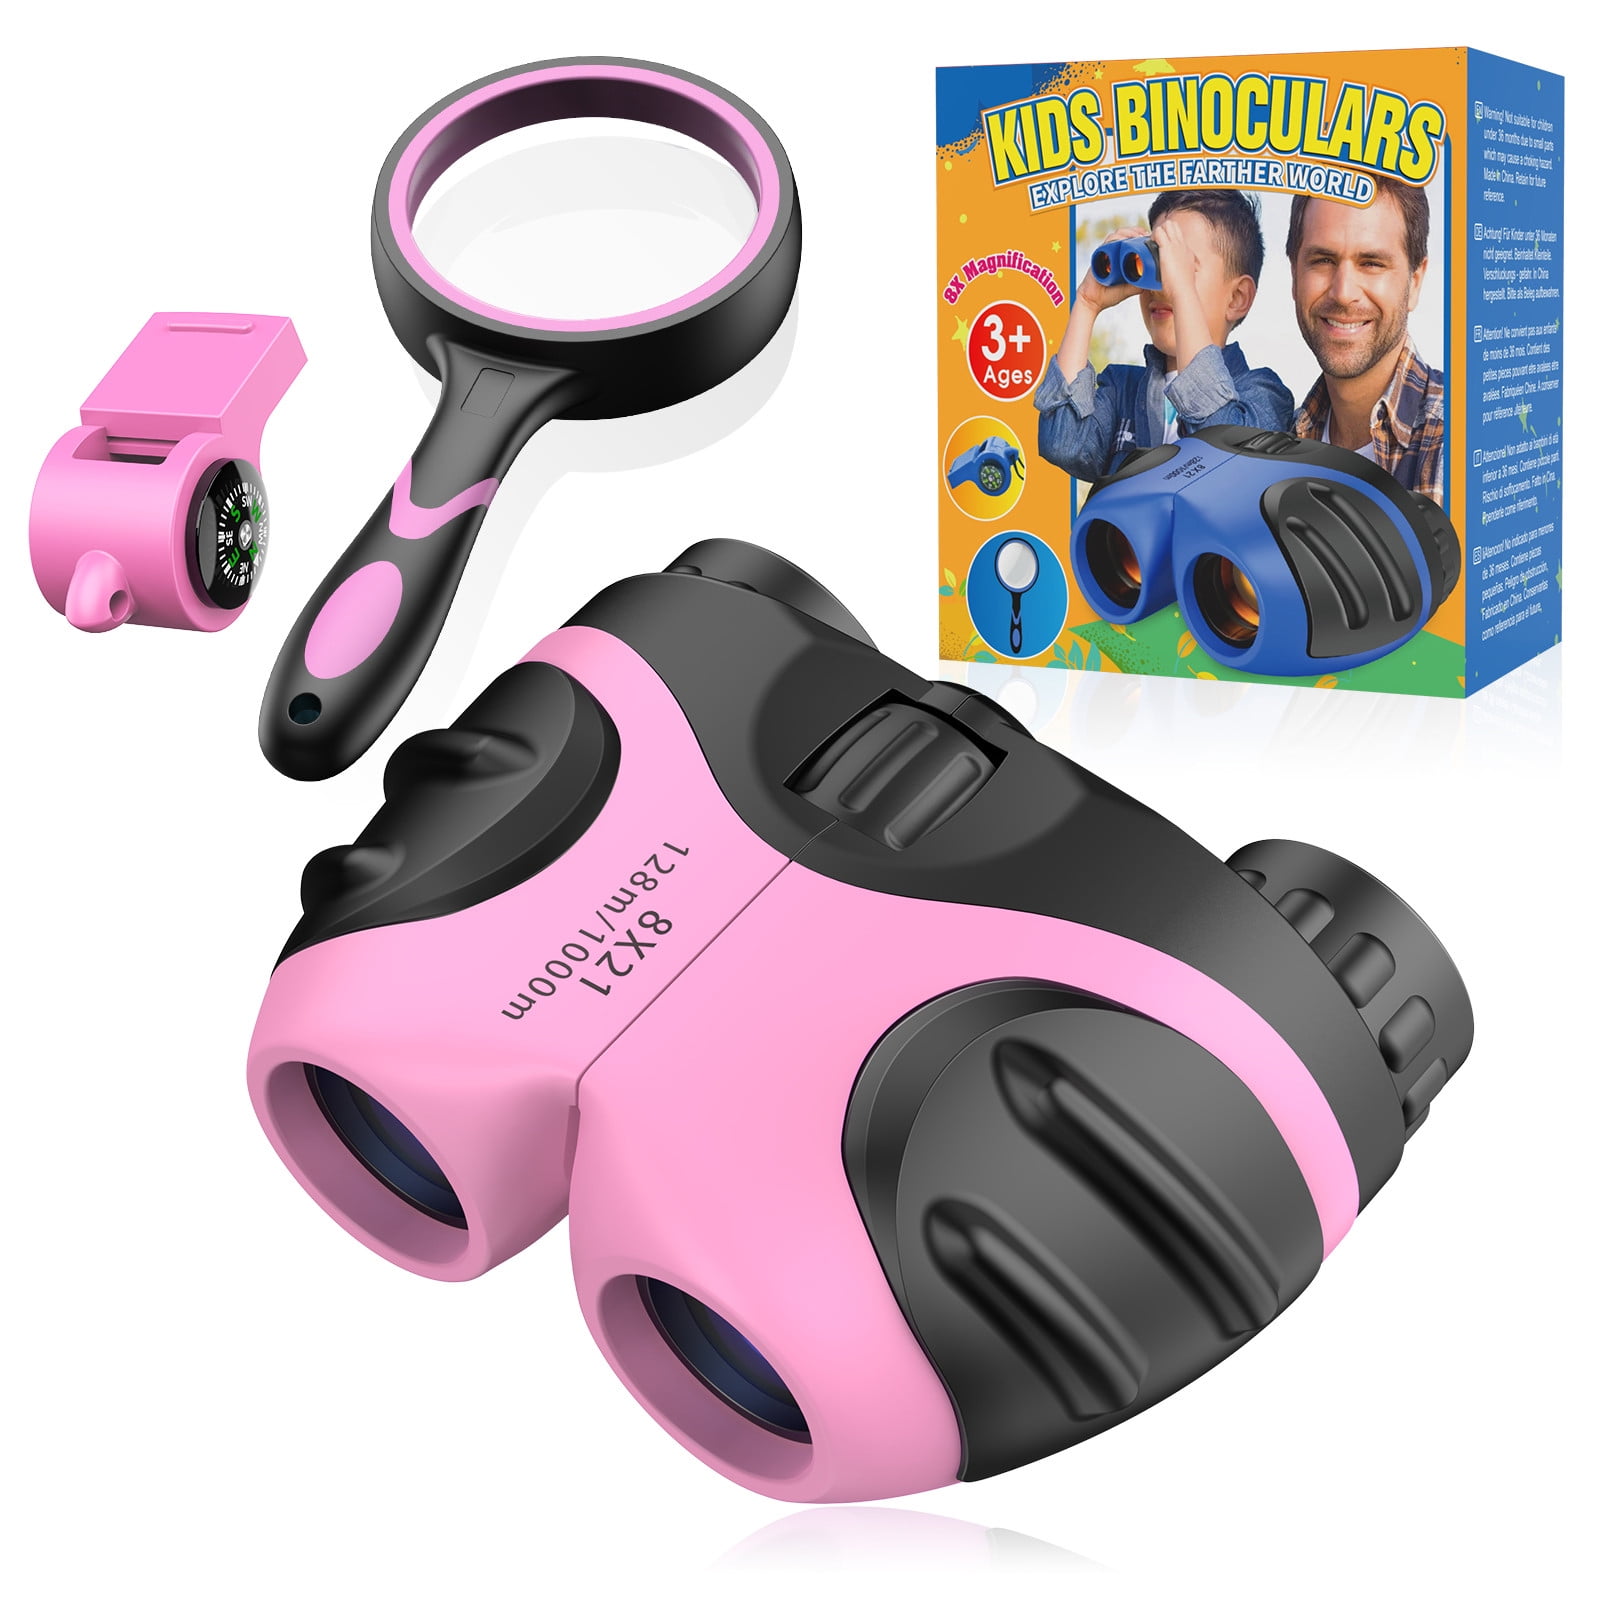 6Pcs Binoculars Set for Kids，Children Binocular Exploration Toy Kit for Camping and Hiking Whistle Hand Crank Flashlight Compass and Drawstring Backpack Magnifying Glass